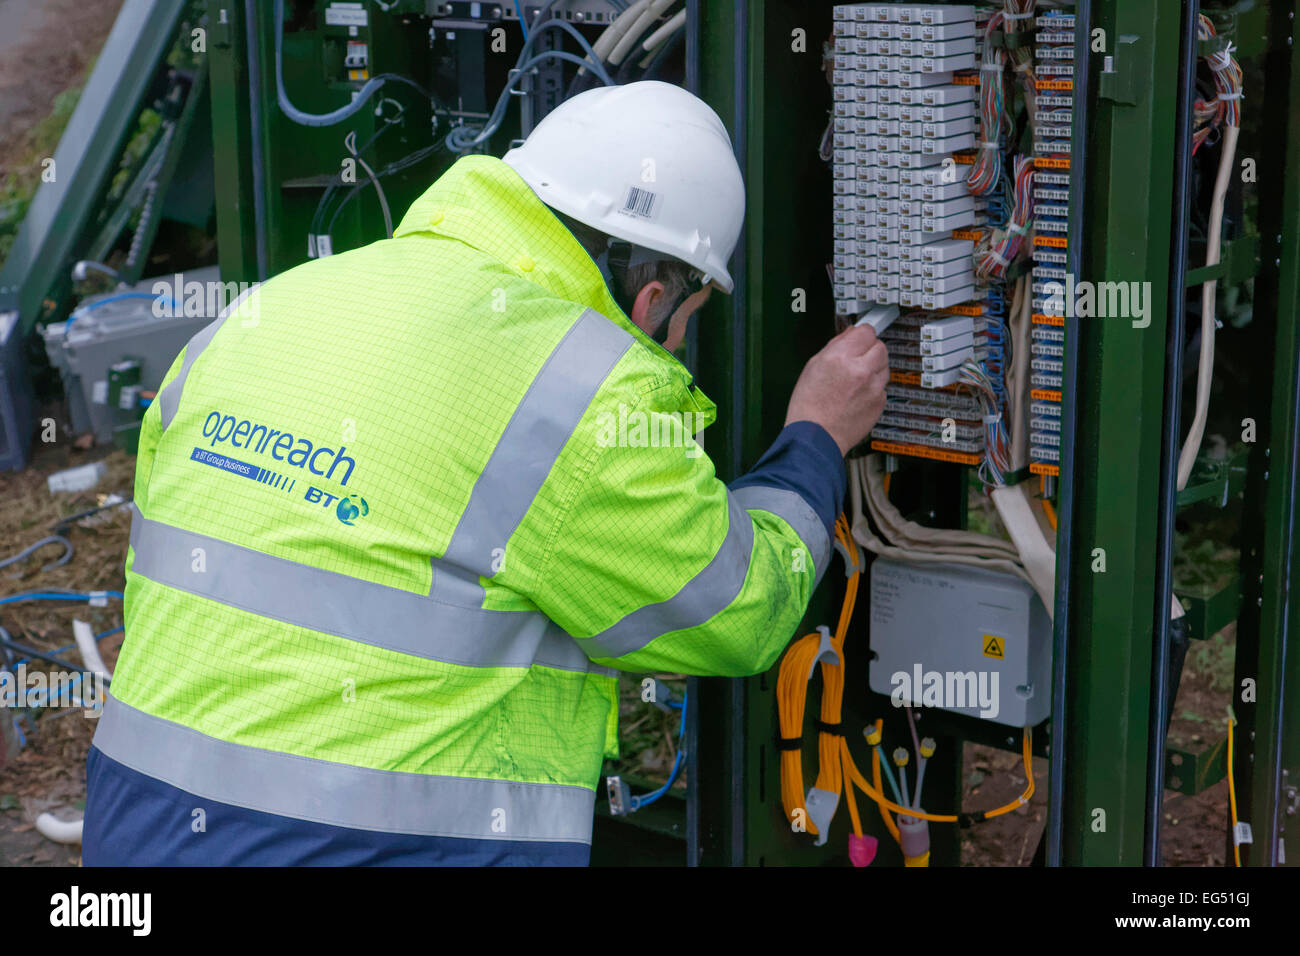 BT Openreach engineer working on a broadband internet fibre cabinet in the street Stock Photo